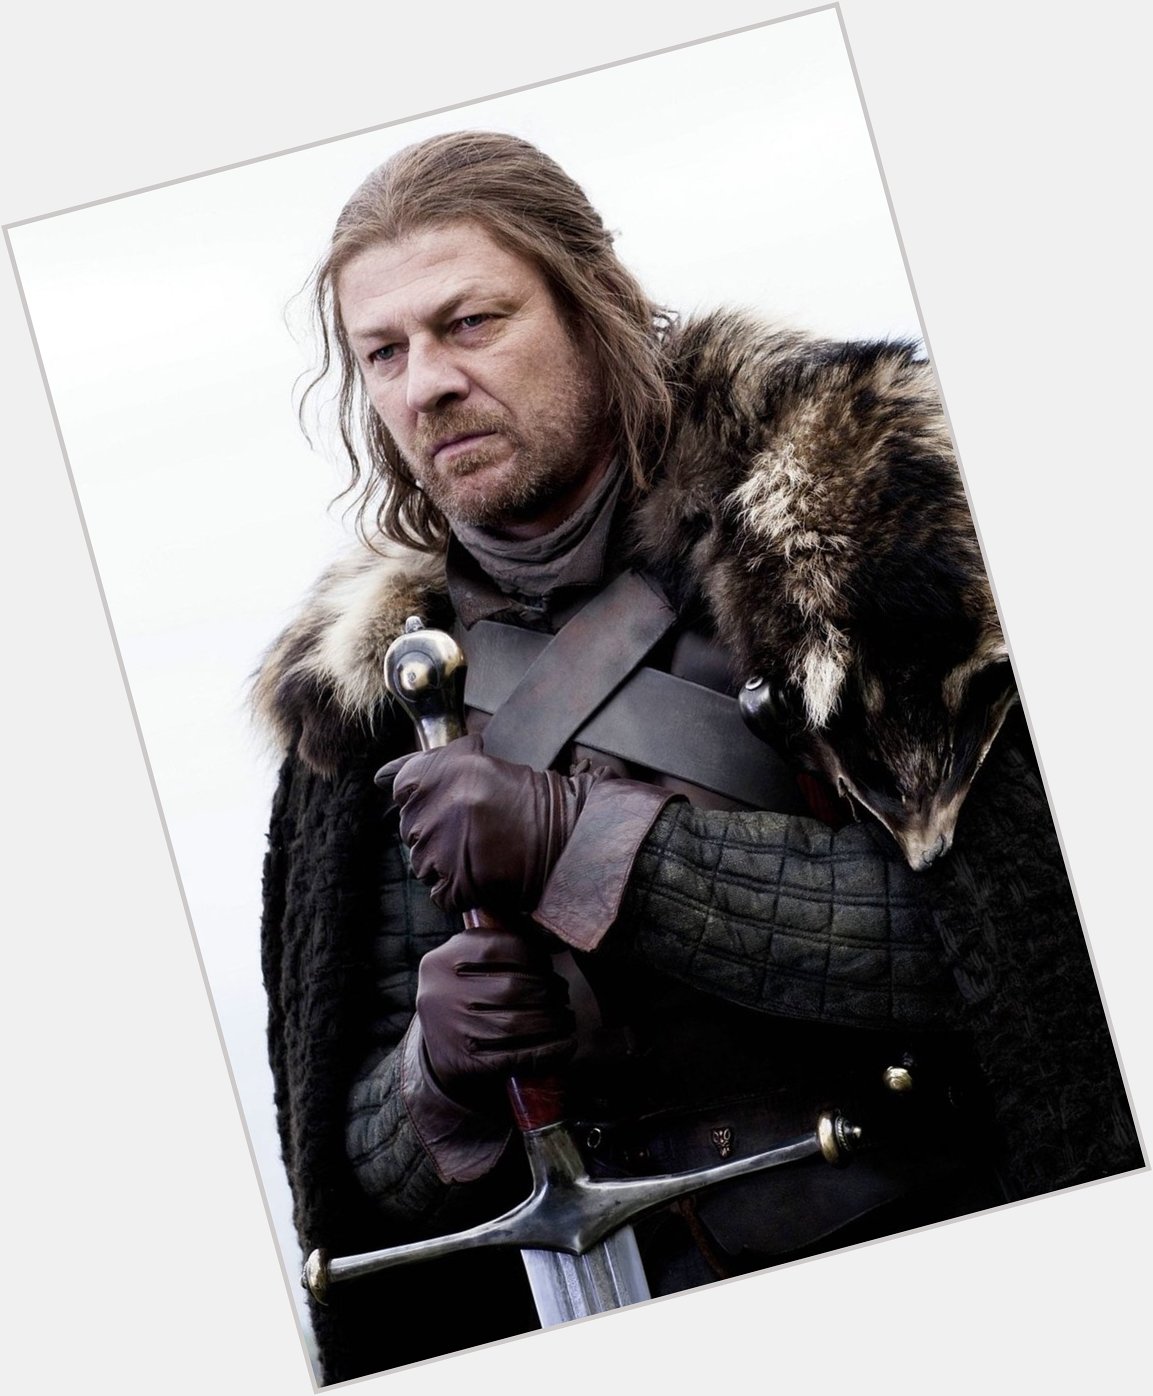 Happy 62nd birthday to actor Sean Bean! Did anyone else love him as Ned Stark on GoT?! 